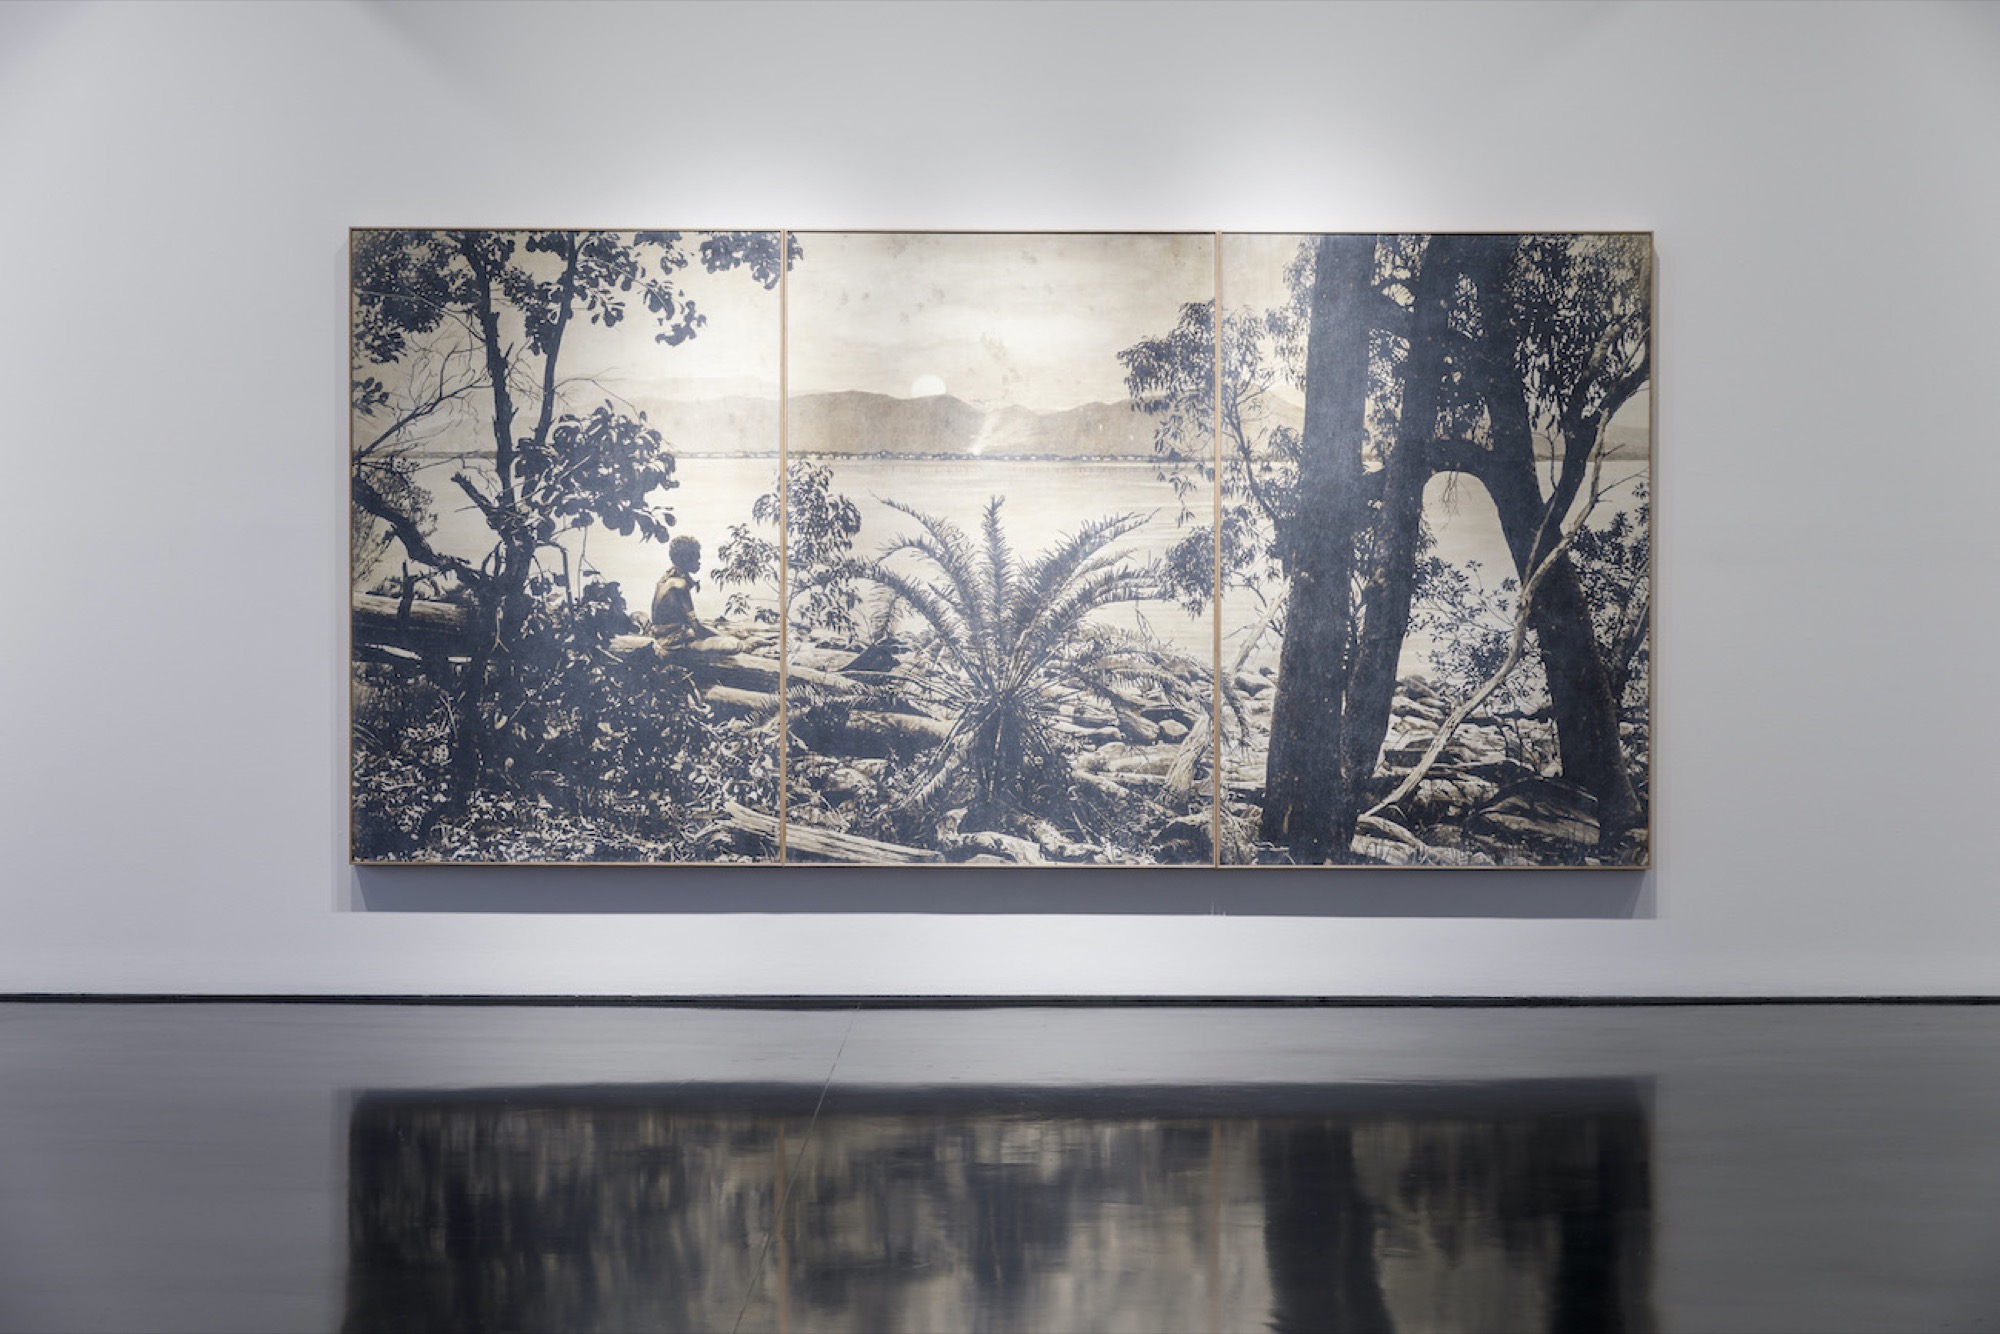 Danie Mellor, <em>On the edge of darkness (the sun also sets)</em>, 2020. Acrylic with gesso and iridescent wash on board. Three panels, overall 181.5 x 371.5 cm, framed. Courtesy Tolarno Galleries. Image: Andrew Curtis.